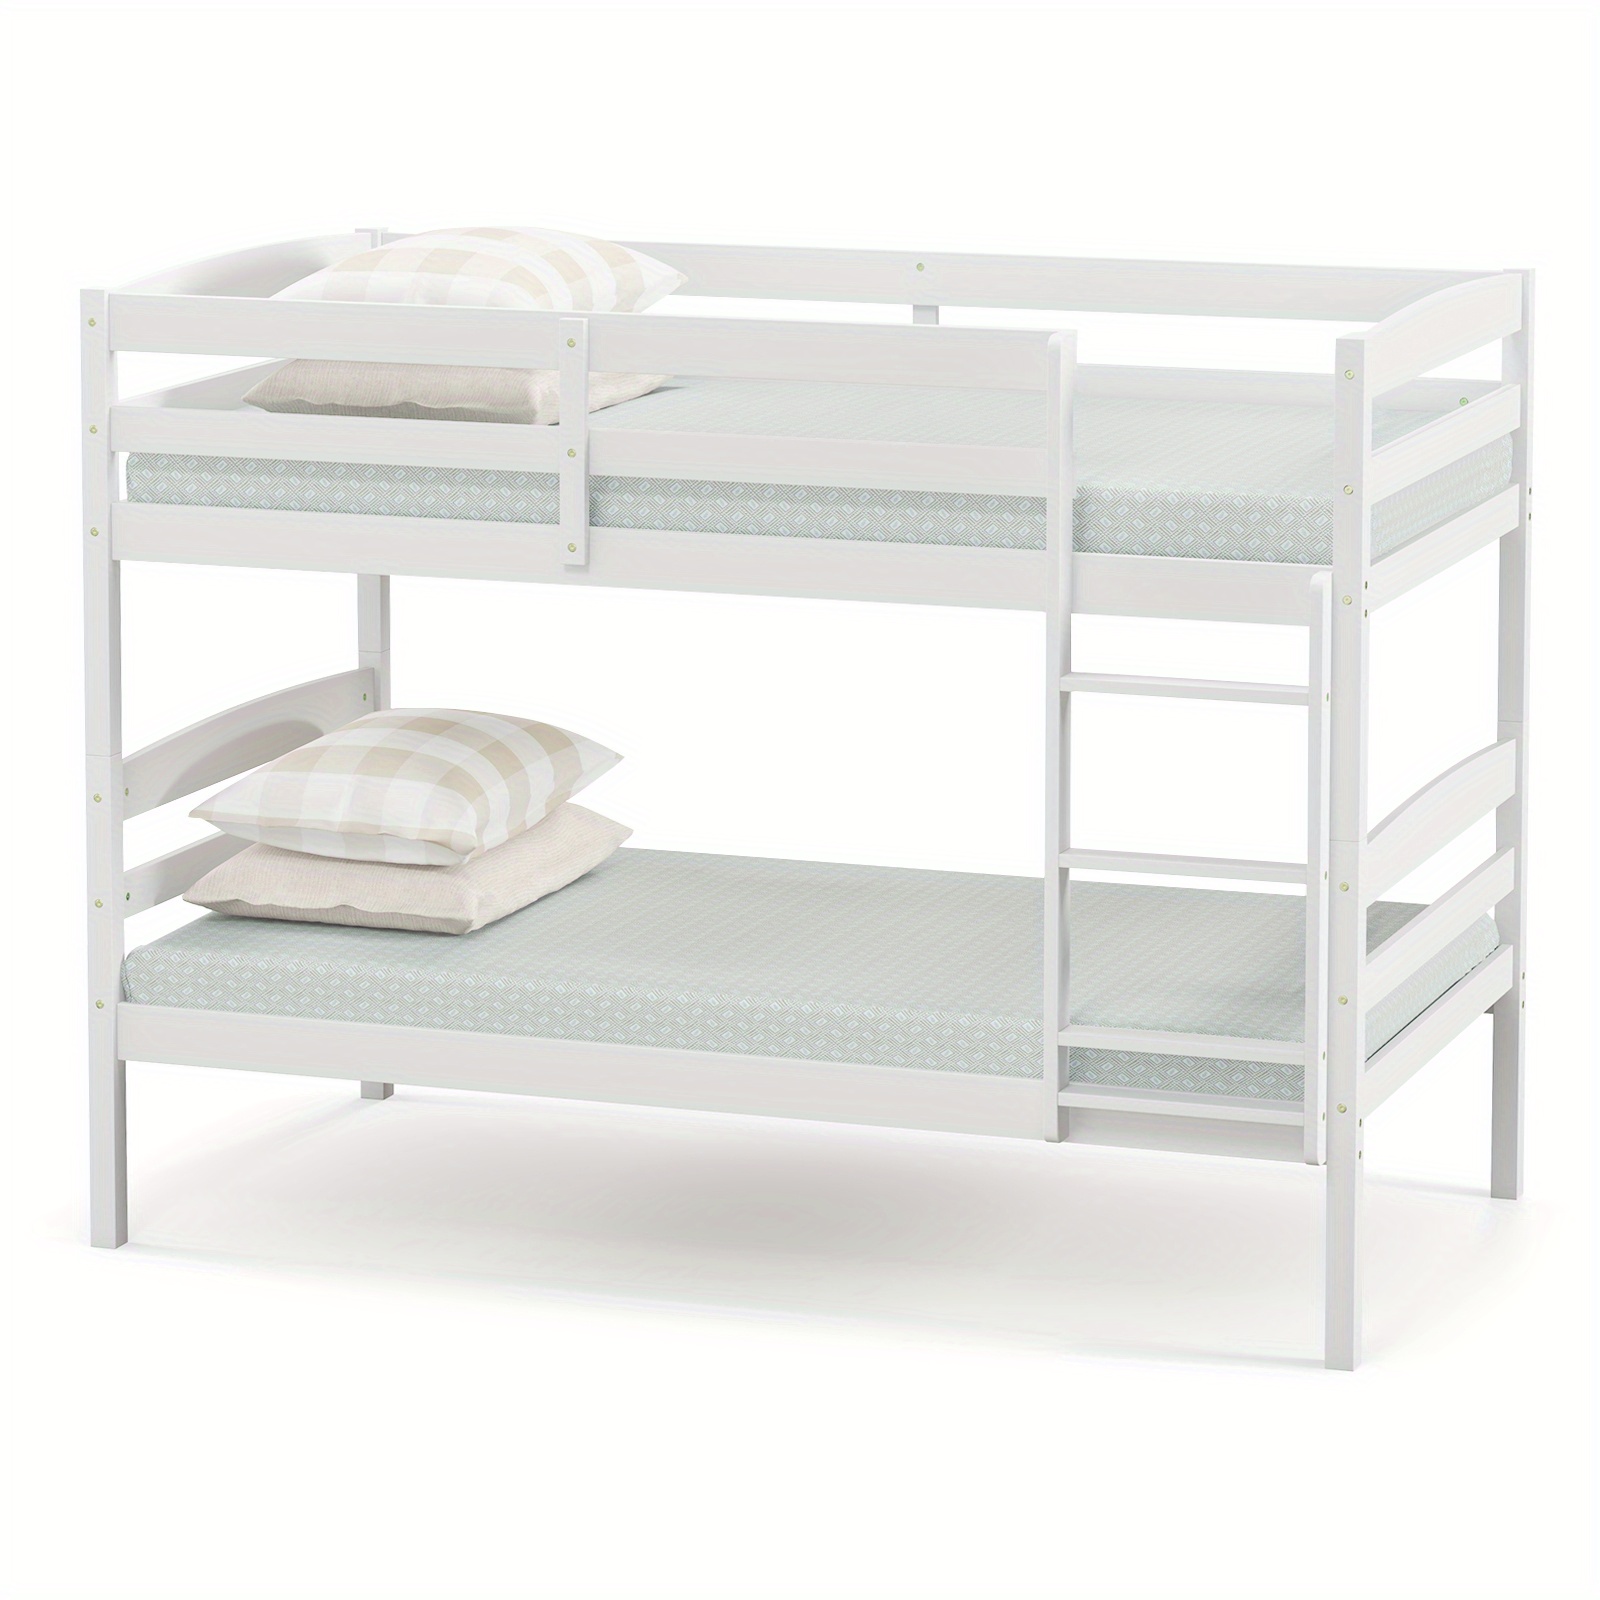 

Costway Twin Over Twin Bunk Bed Wooden Convertible Into 2 Beds High Guardrails White